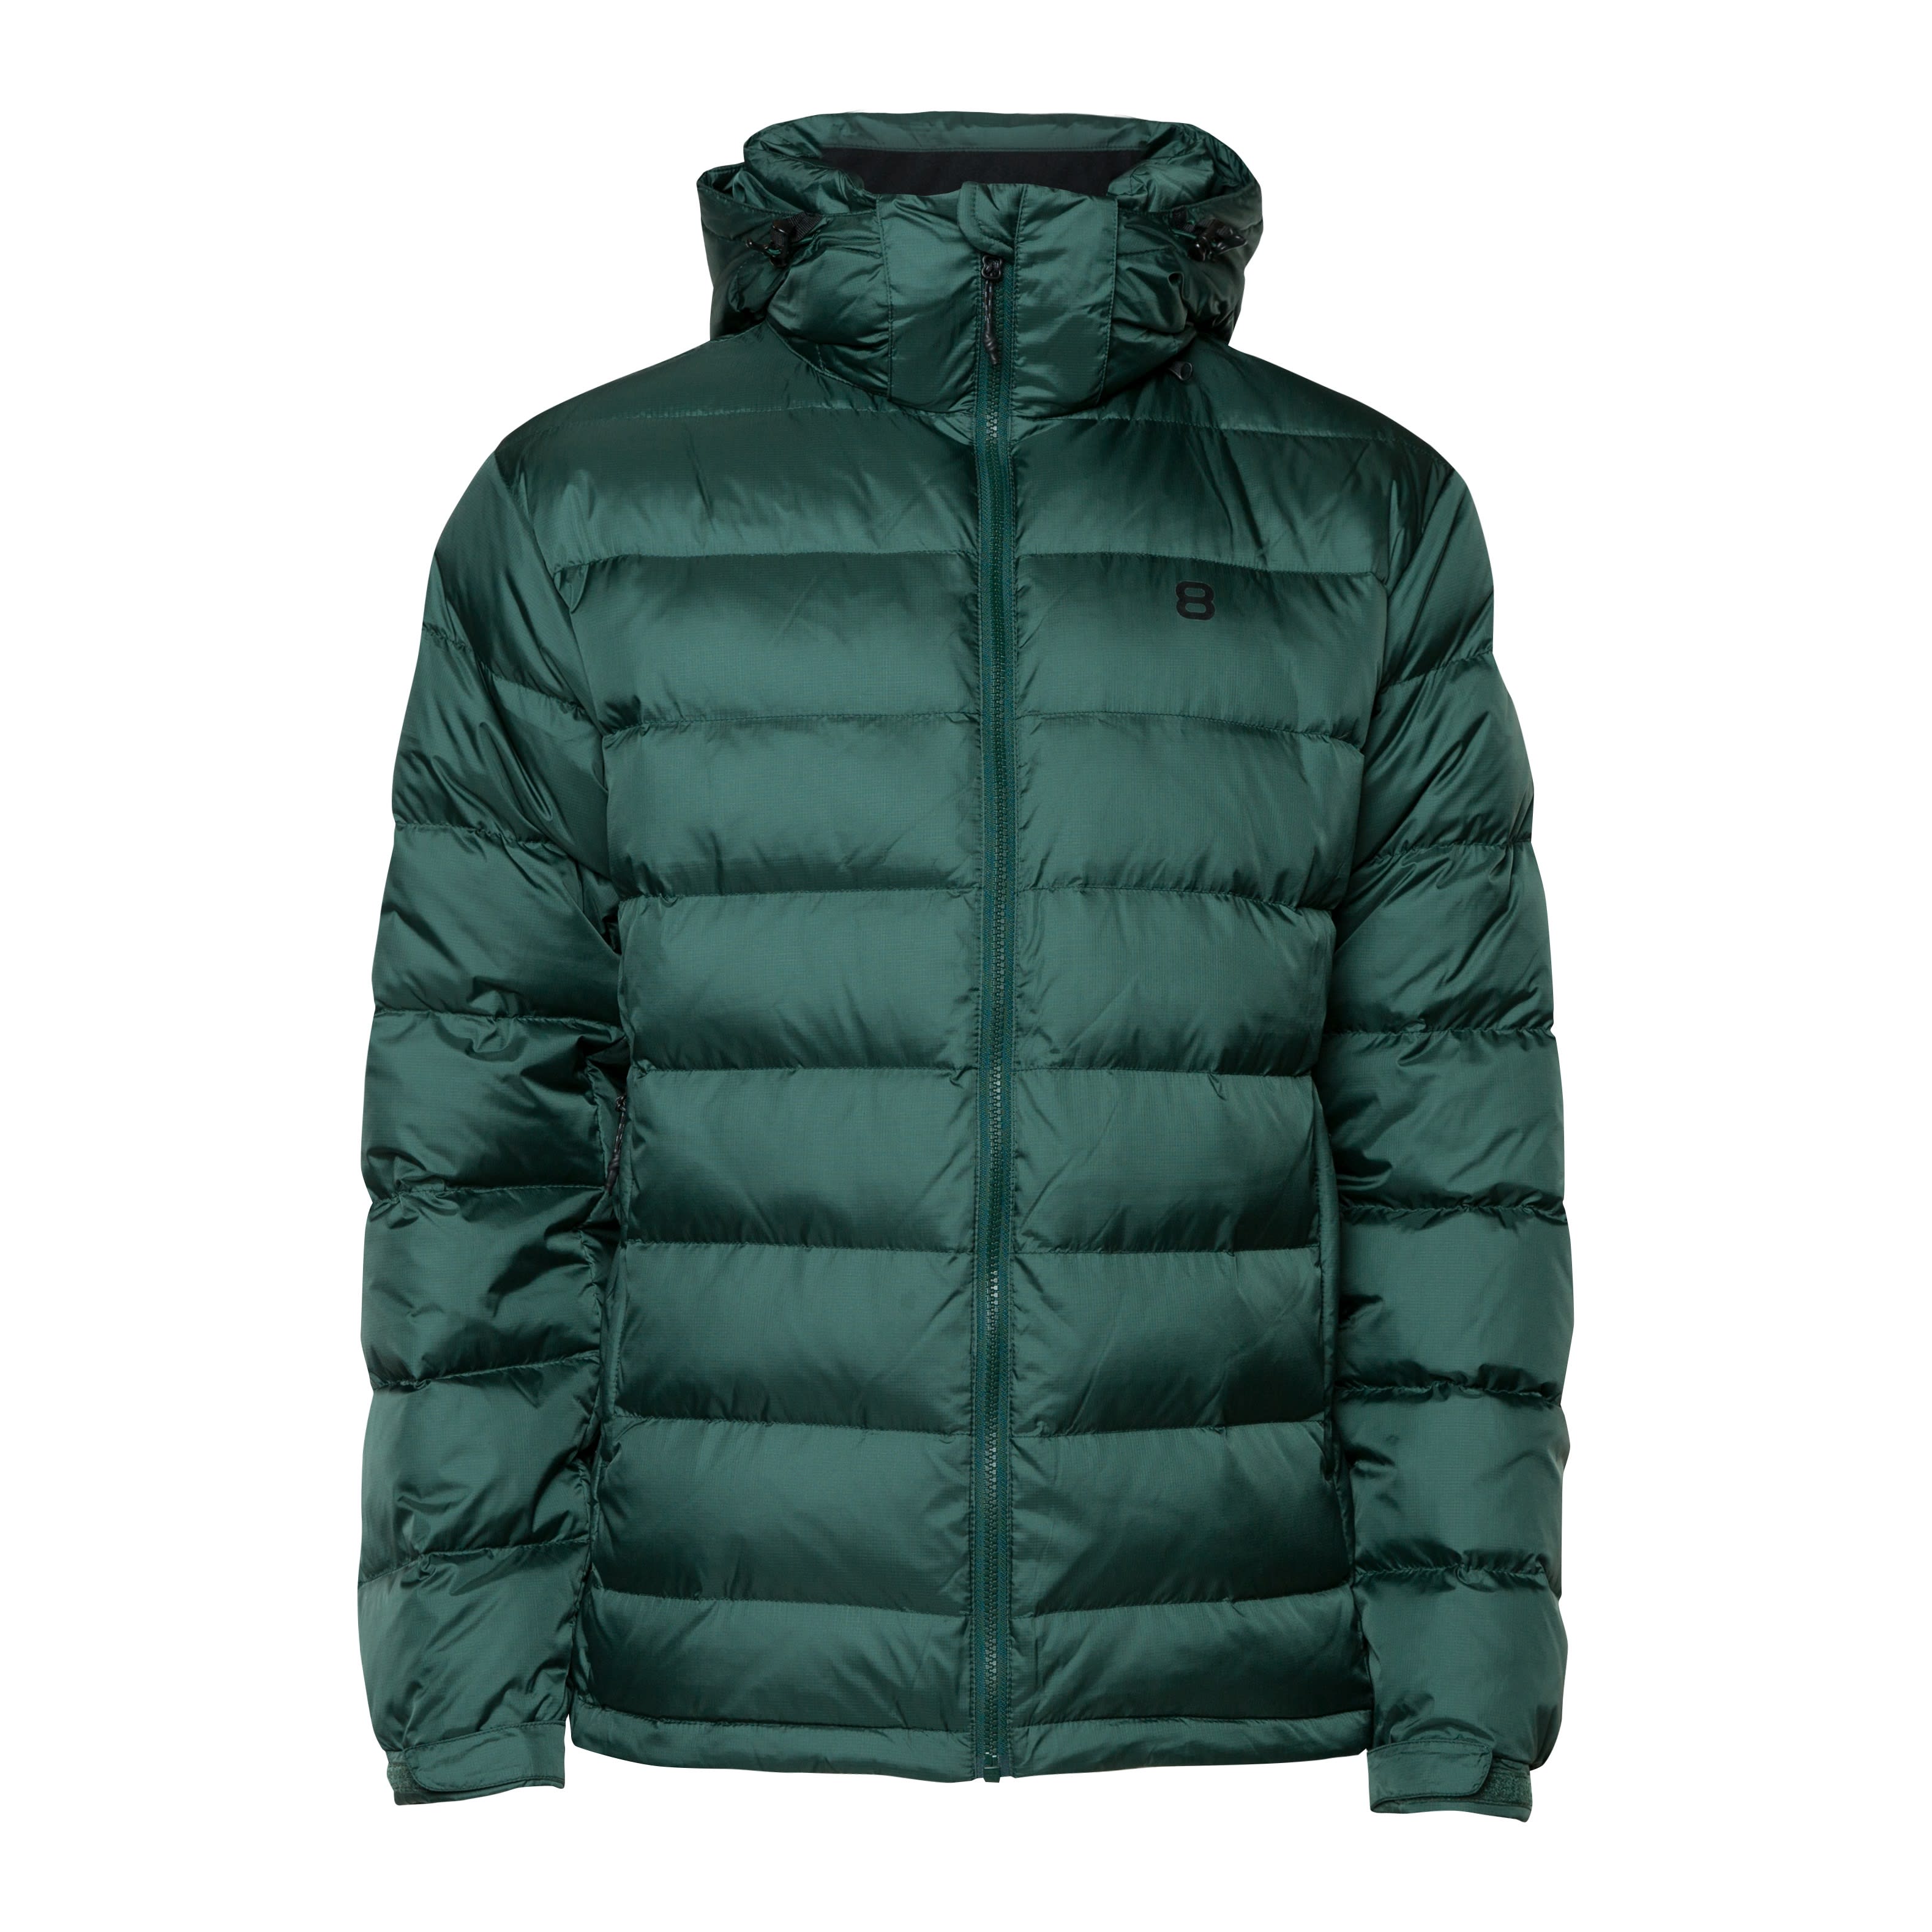 Endeløs Billy nægte Buy 8848 Altitude Men's Edzo Down Jacket from Outnorth